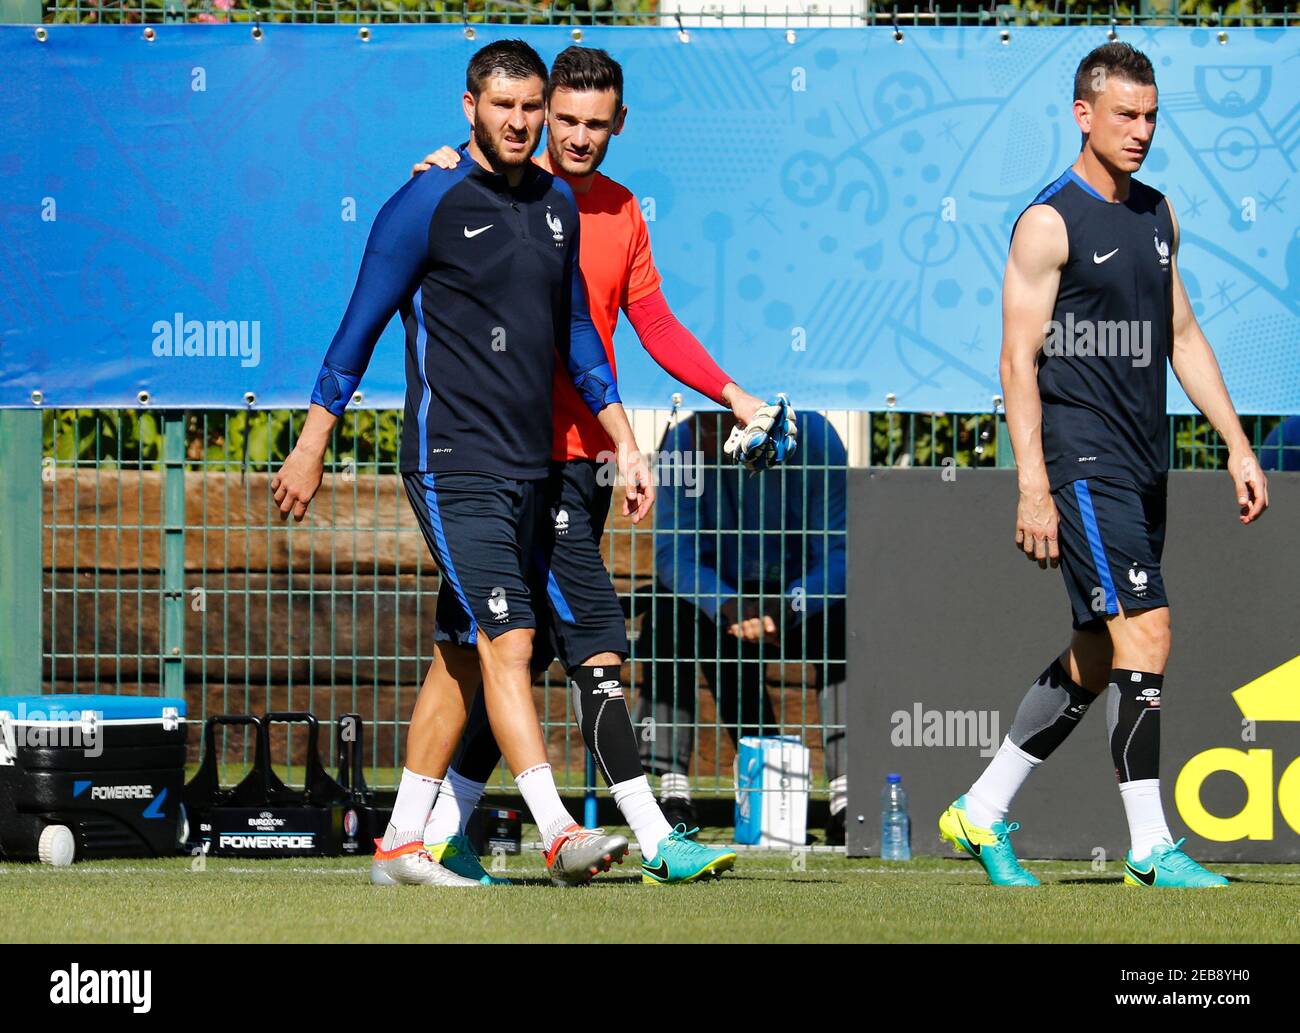 Football Soccer - France Training - EURO 2016 - Olympique Marseille  Training Ground - Marseille, France - 6/7/16 France's Andre Pierre Gignac,  Hugo Lloris and Laurent Koscielny during training REUTERS/Michael Dalder  Livepic Stock Photo - Alamy